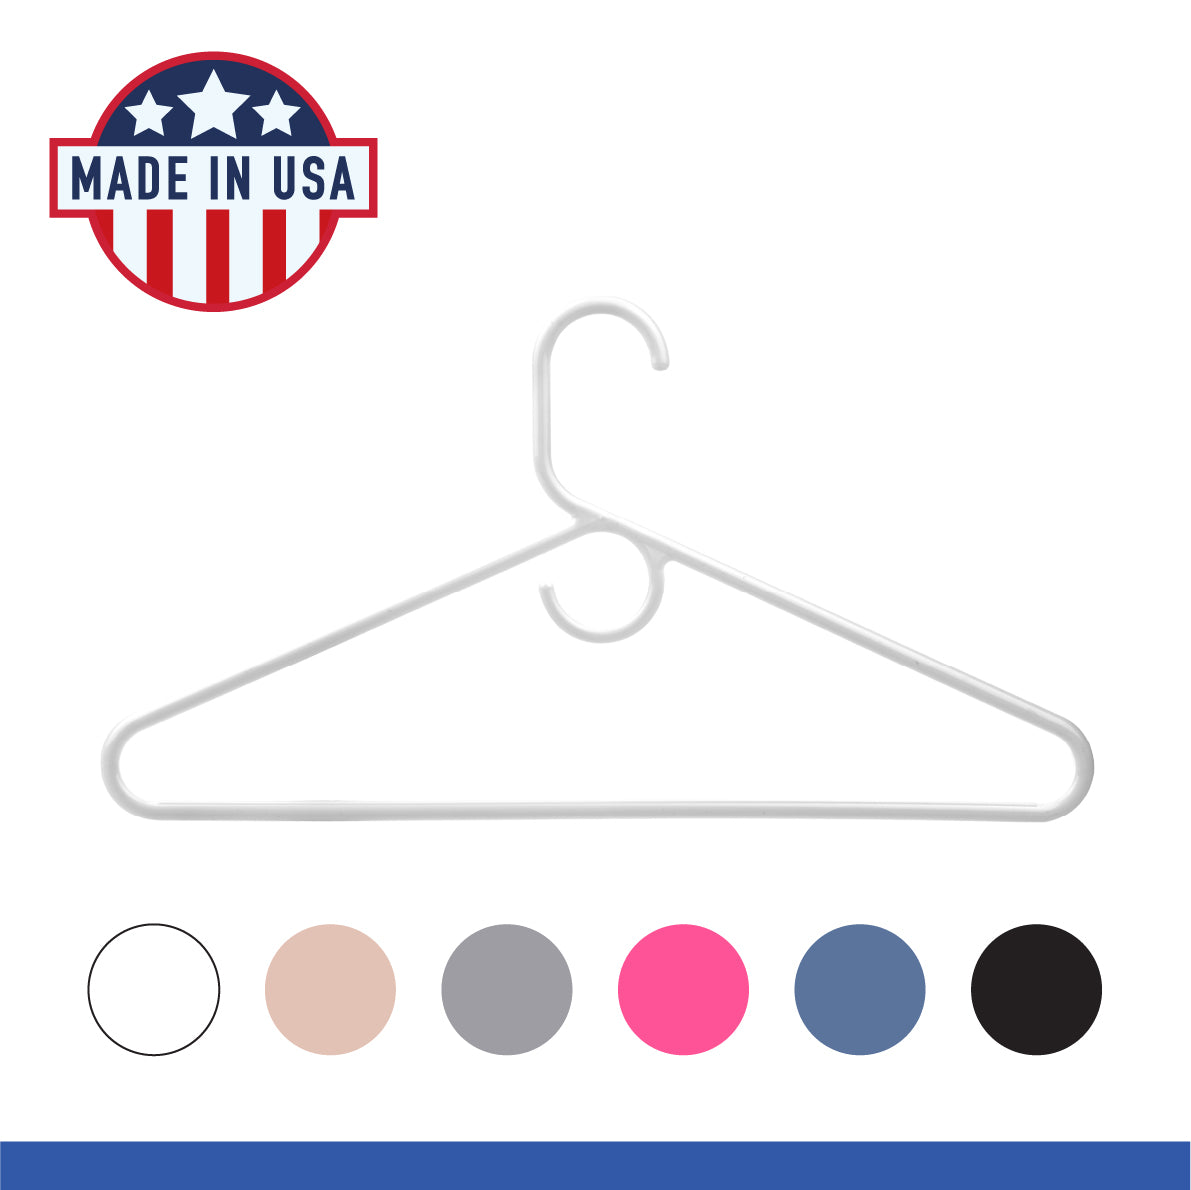 Neaties American Made Steel Blue Super Heavy Duty Plastic Hangers, Plastic  Clothes Hangers Ideal for Everyday